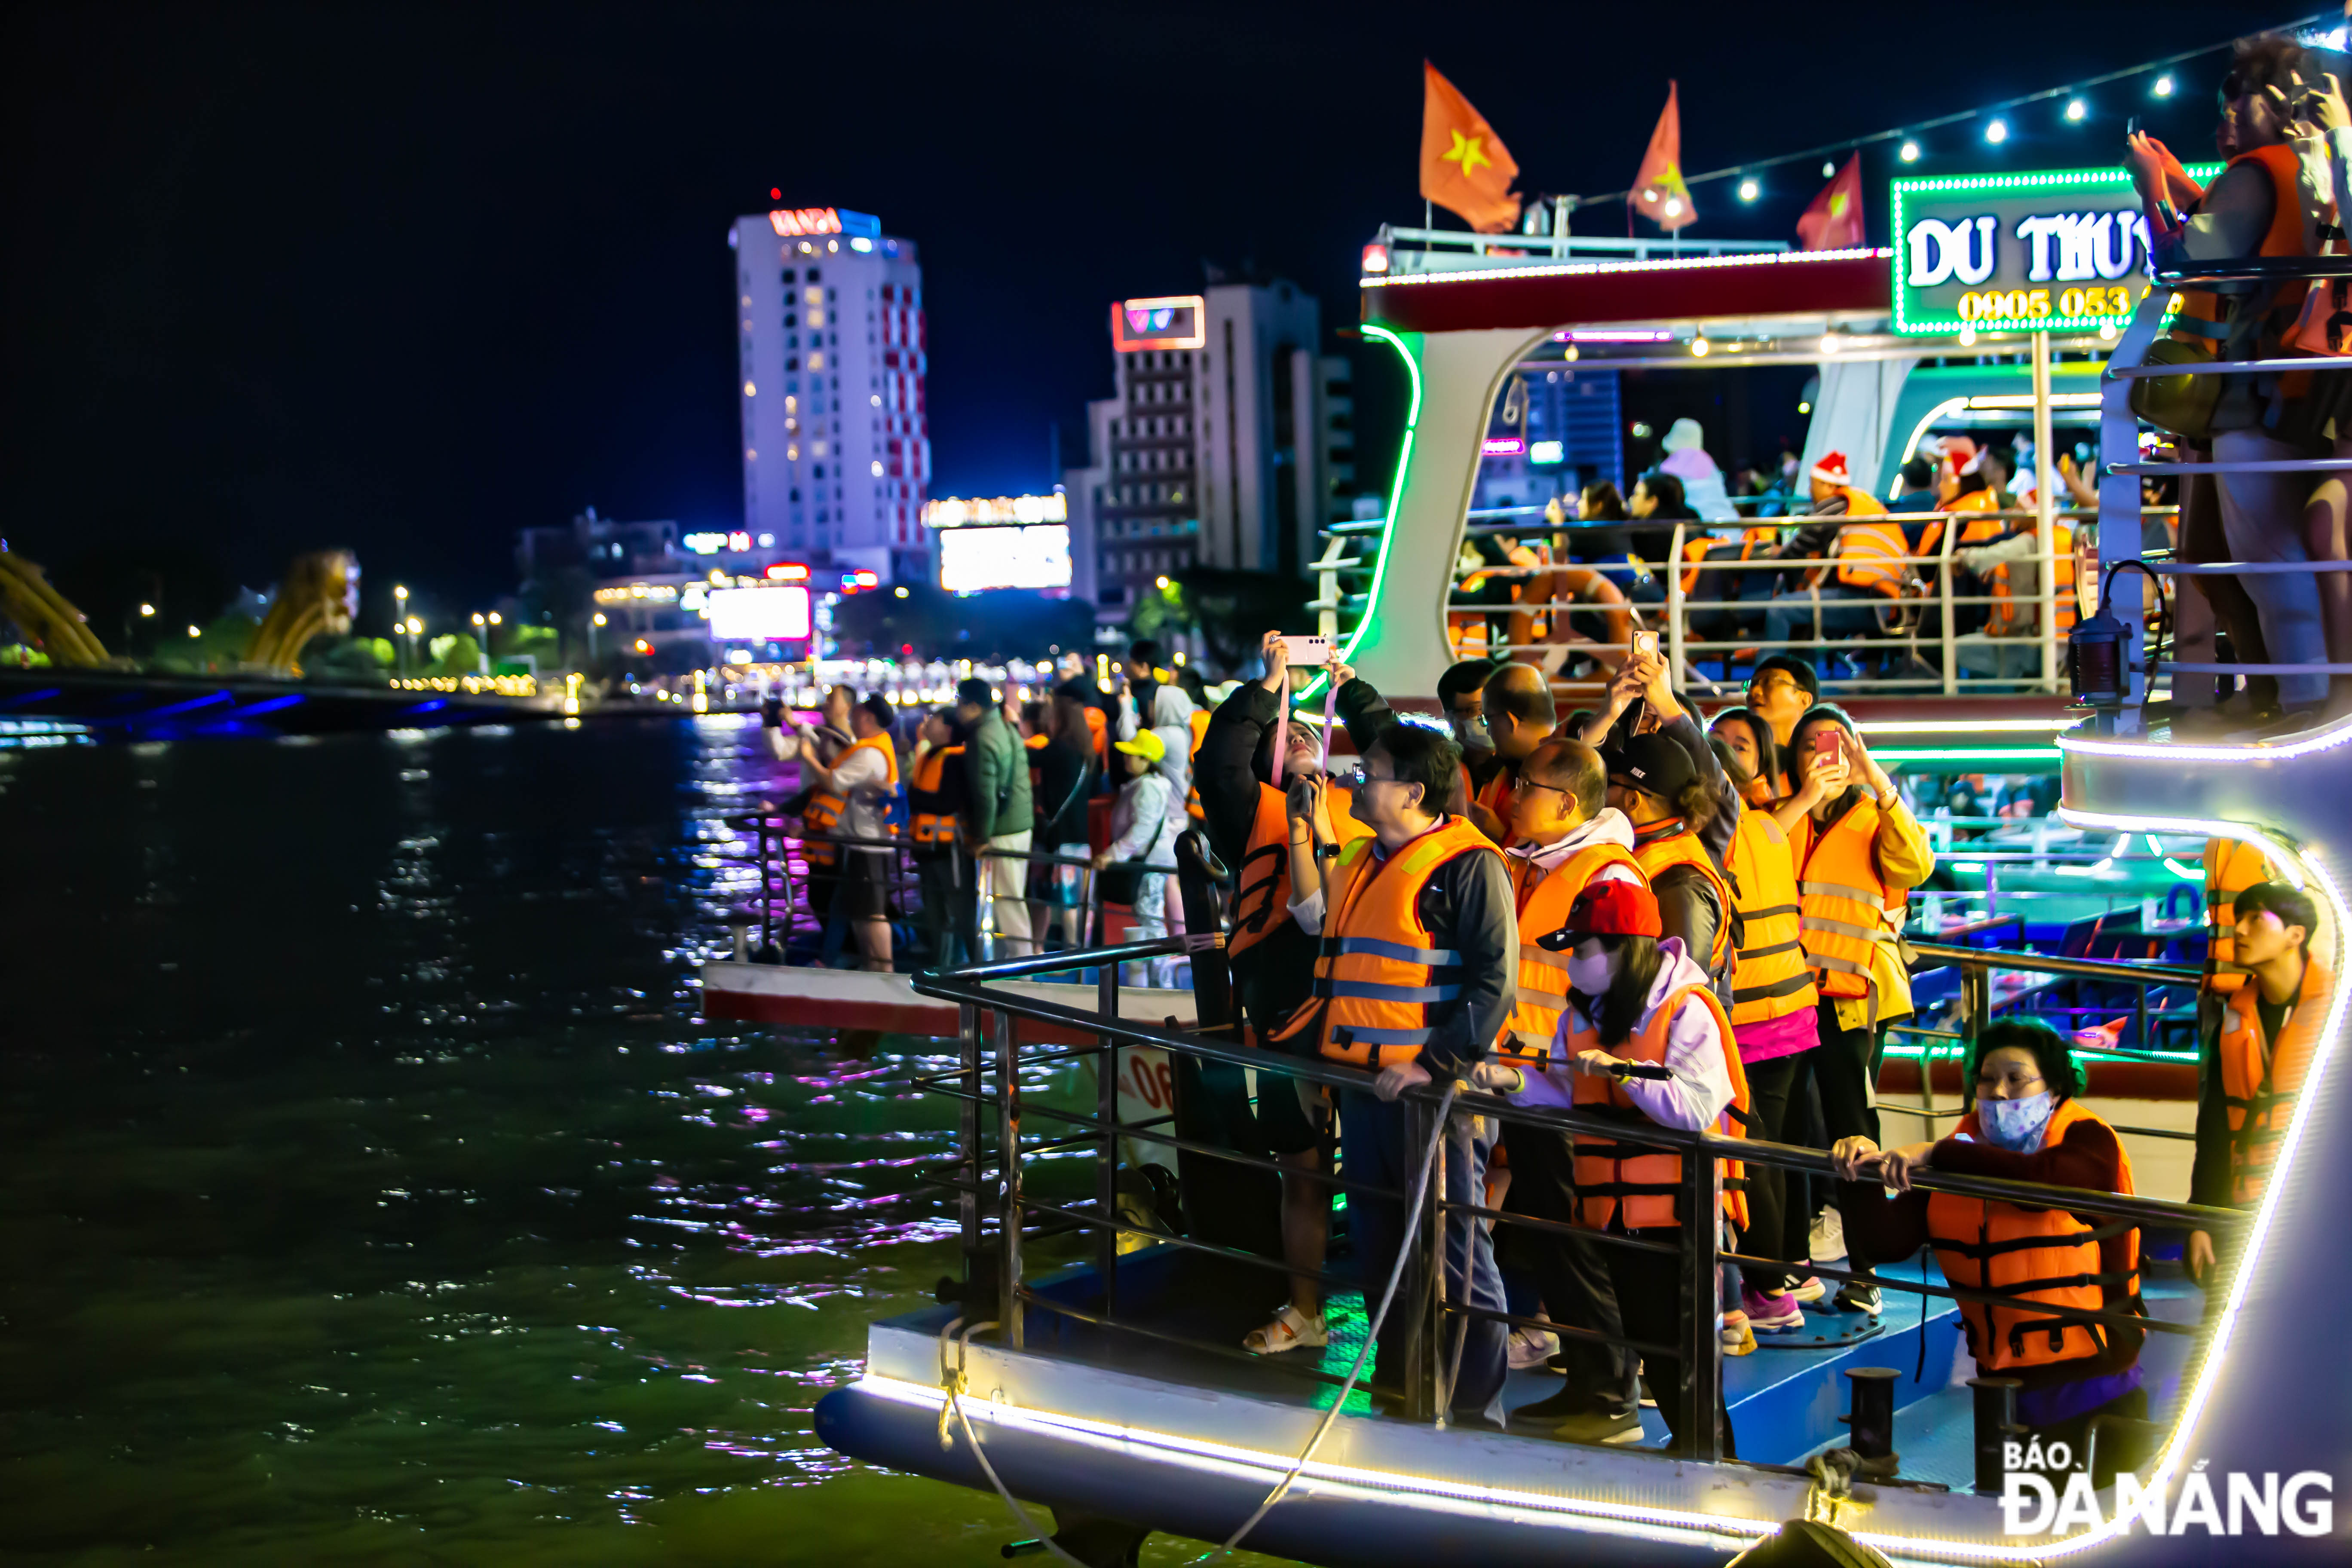 Tourists on boat tours on the Han River wearing life jackets